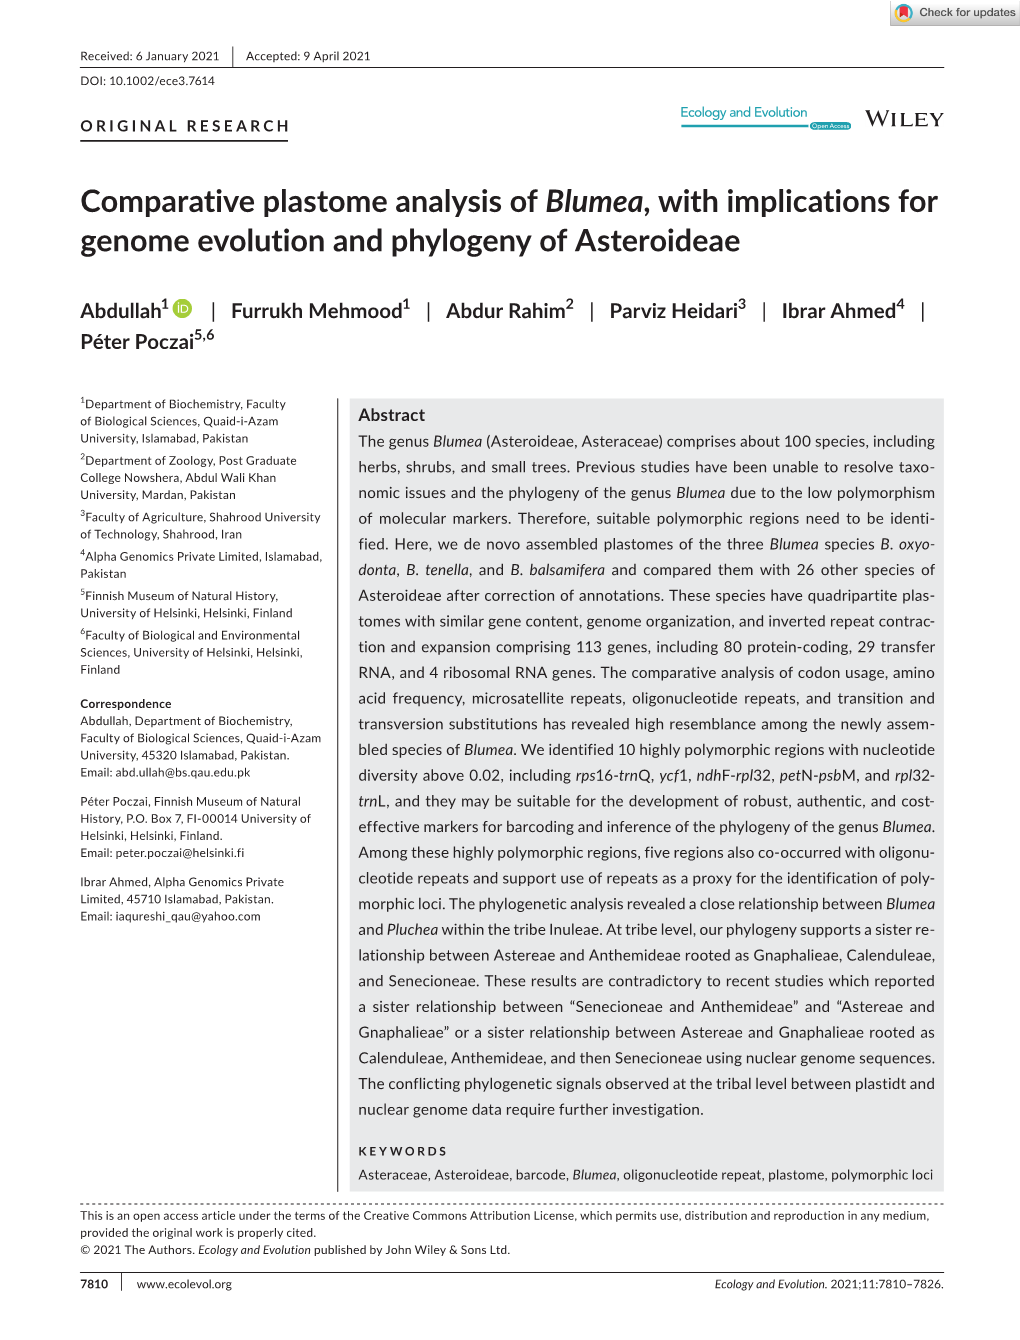 Comparative Plastome Analysis of Blumea, with Implications for Genome Evolution and Phylogeny of Asteroideae